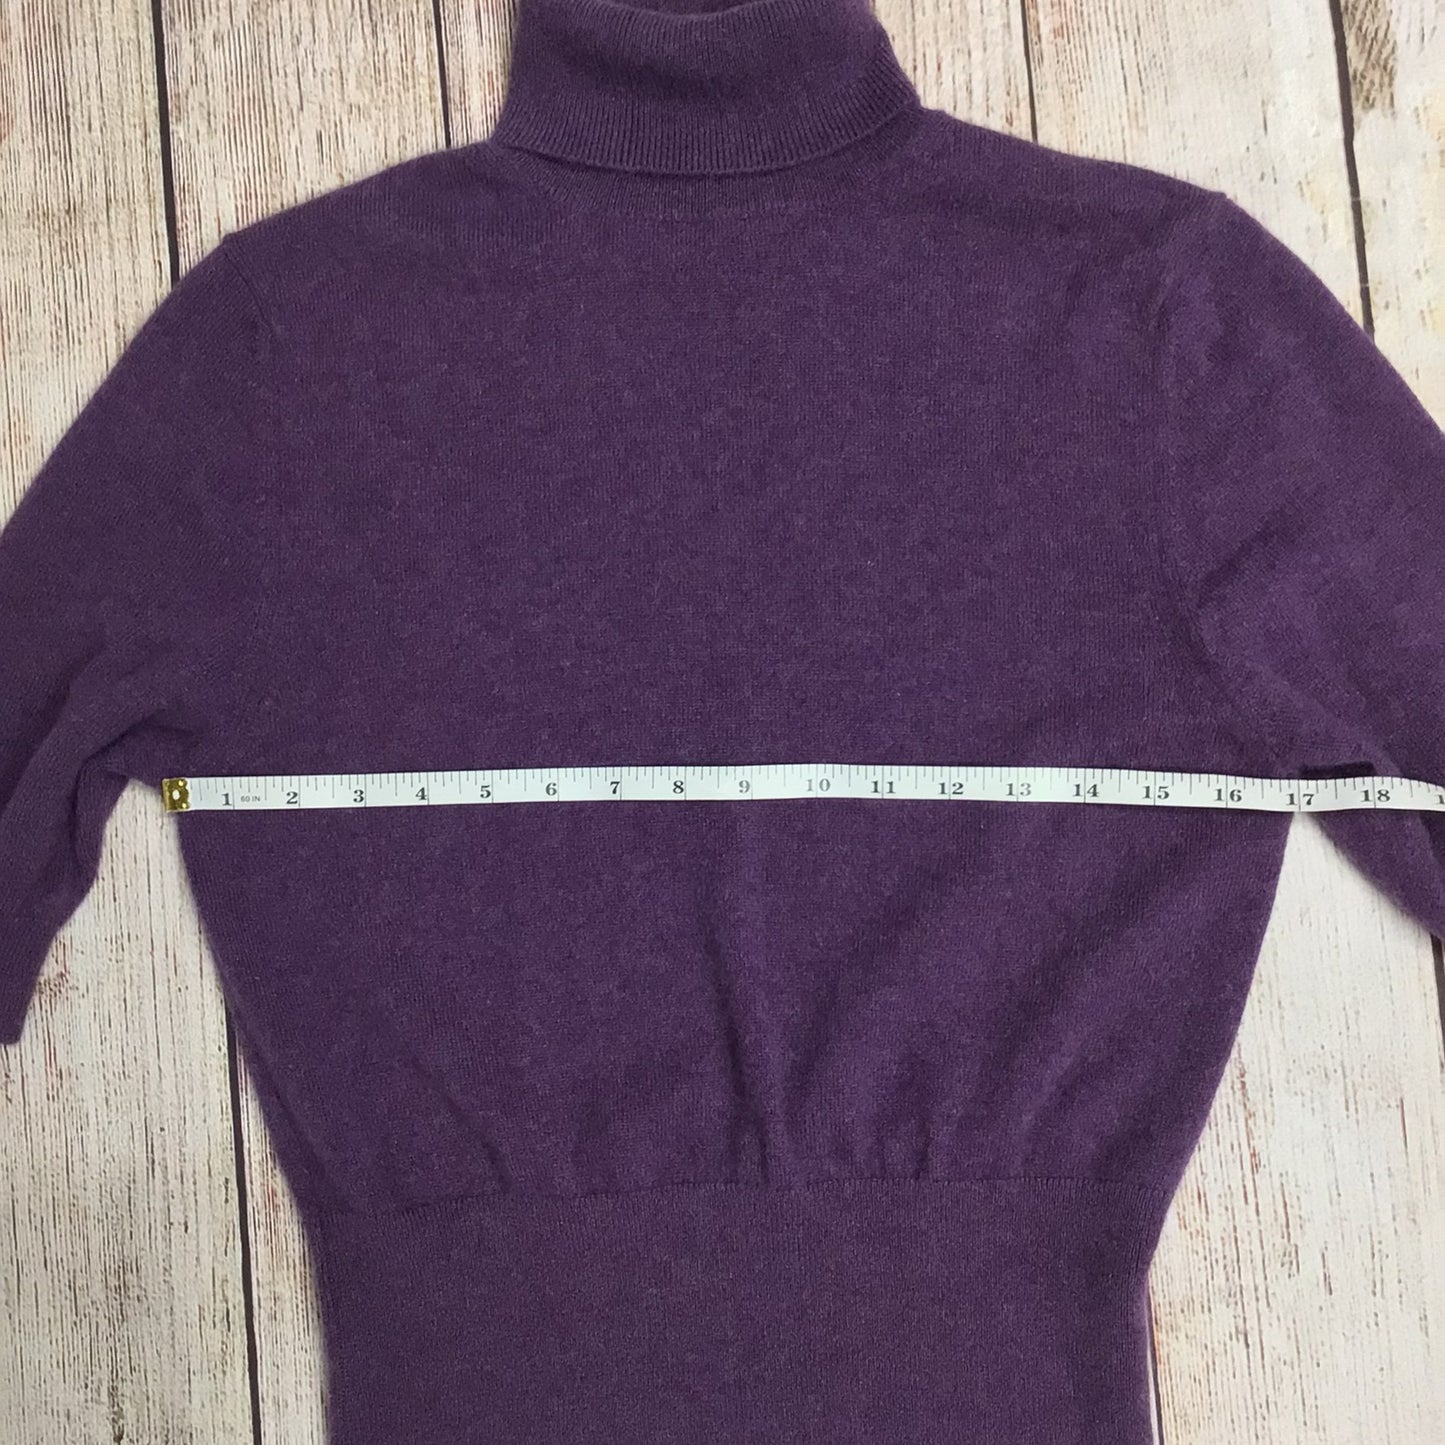 CXD London Purple Roll Neck Short Sleeved Knitted Top 100% Cashmere Size XL